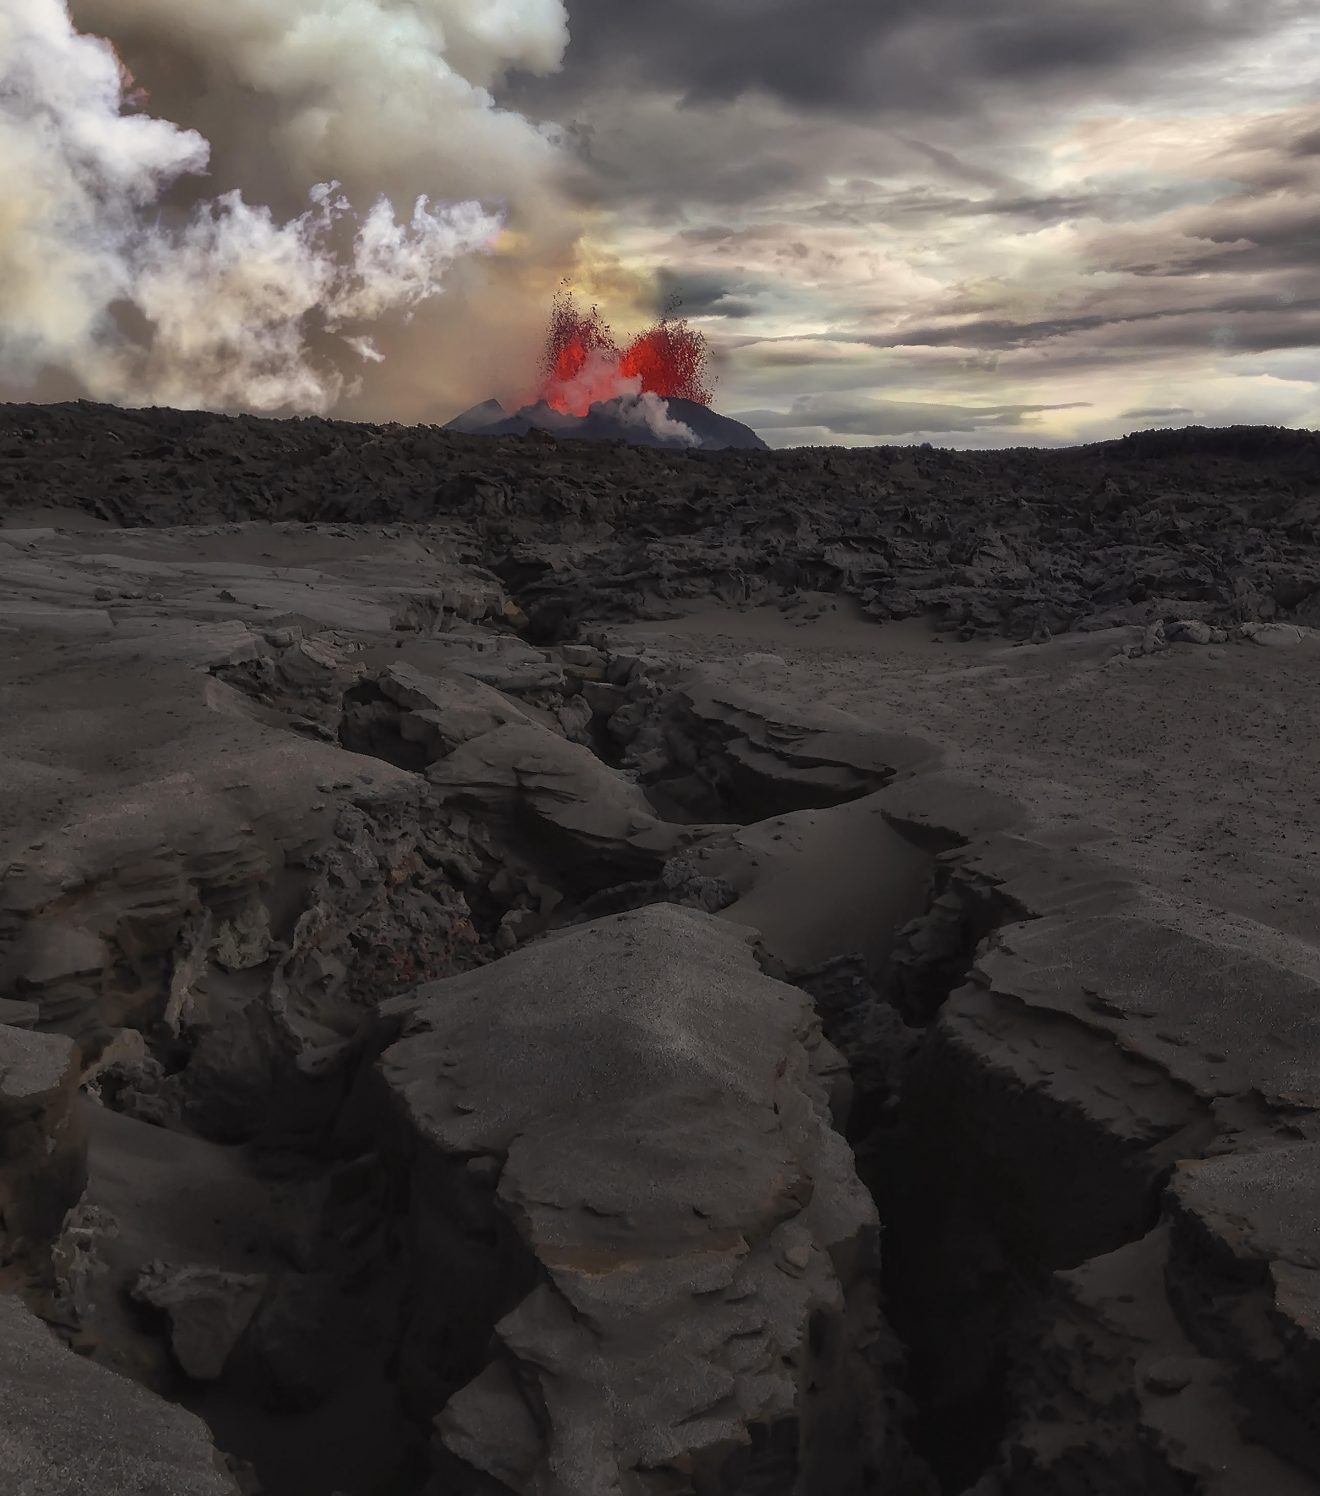 Eruption and surface faulting in the Baroarbunga volcanic system in Iceland on September 14, 2014.